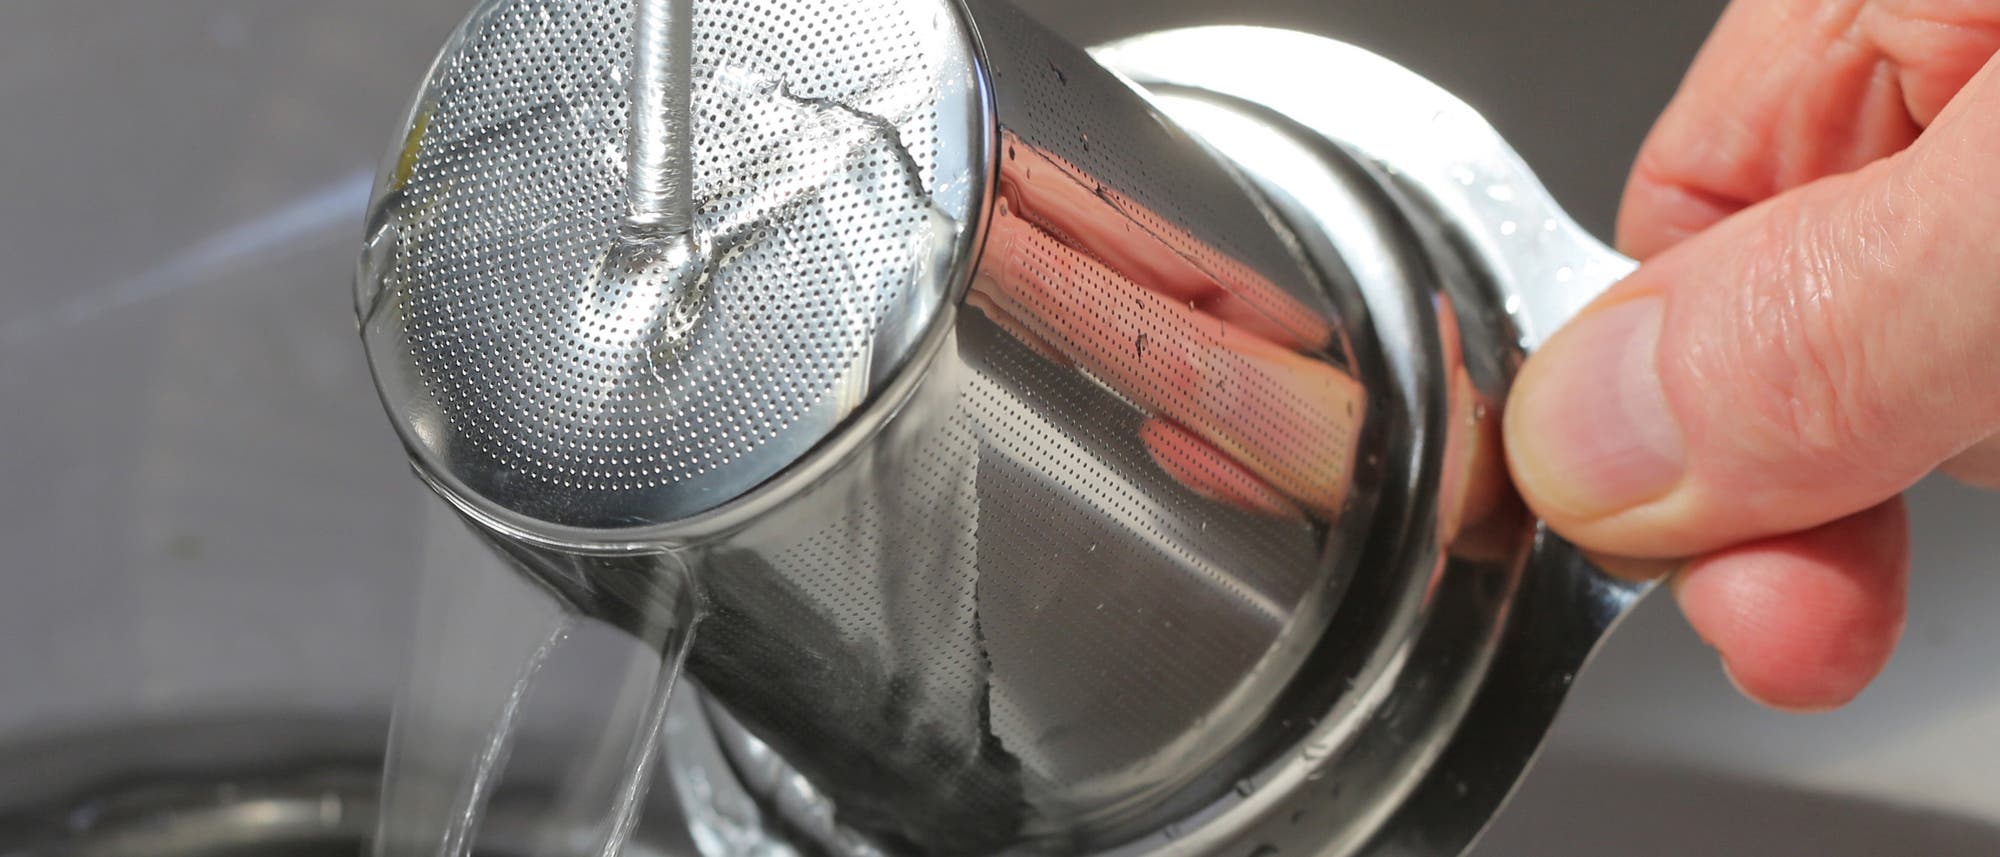 A stainless steel tea strainer is cleaned under a jet of water in the sink